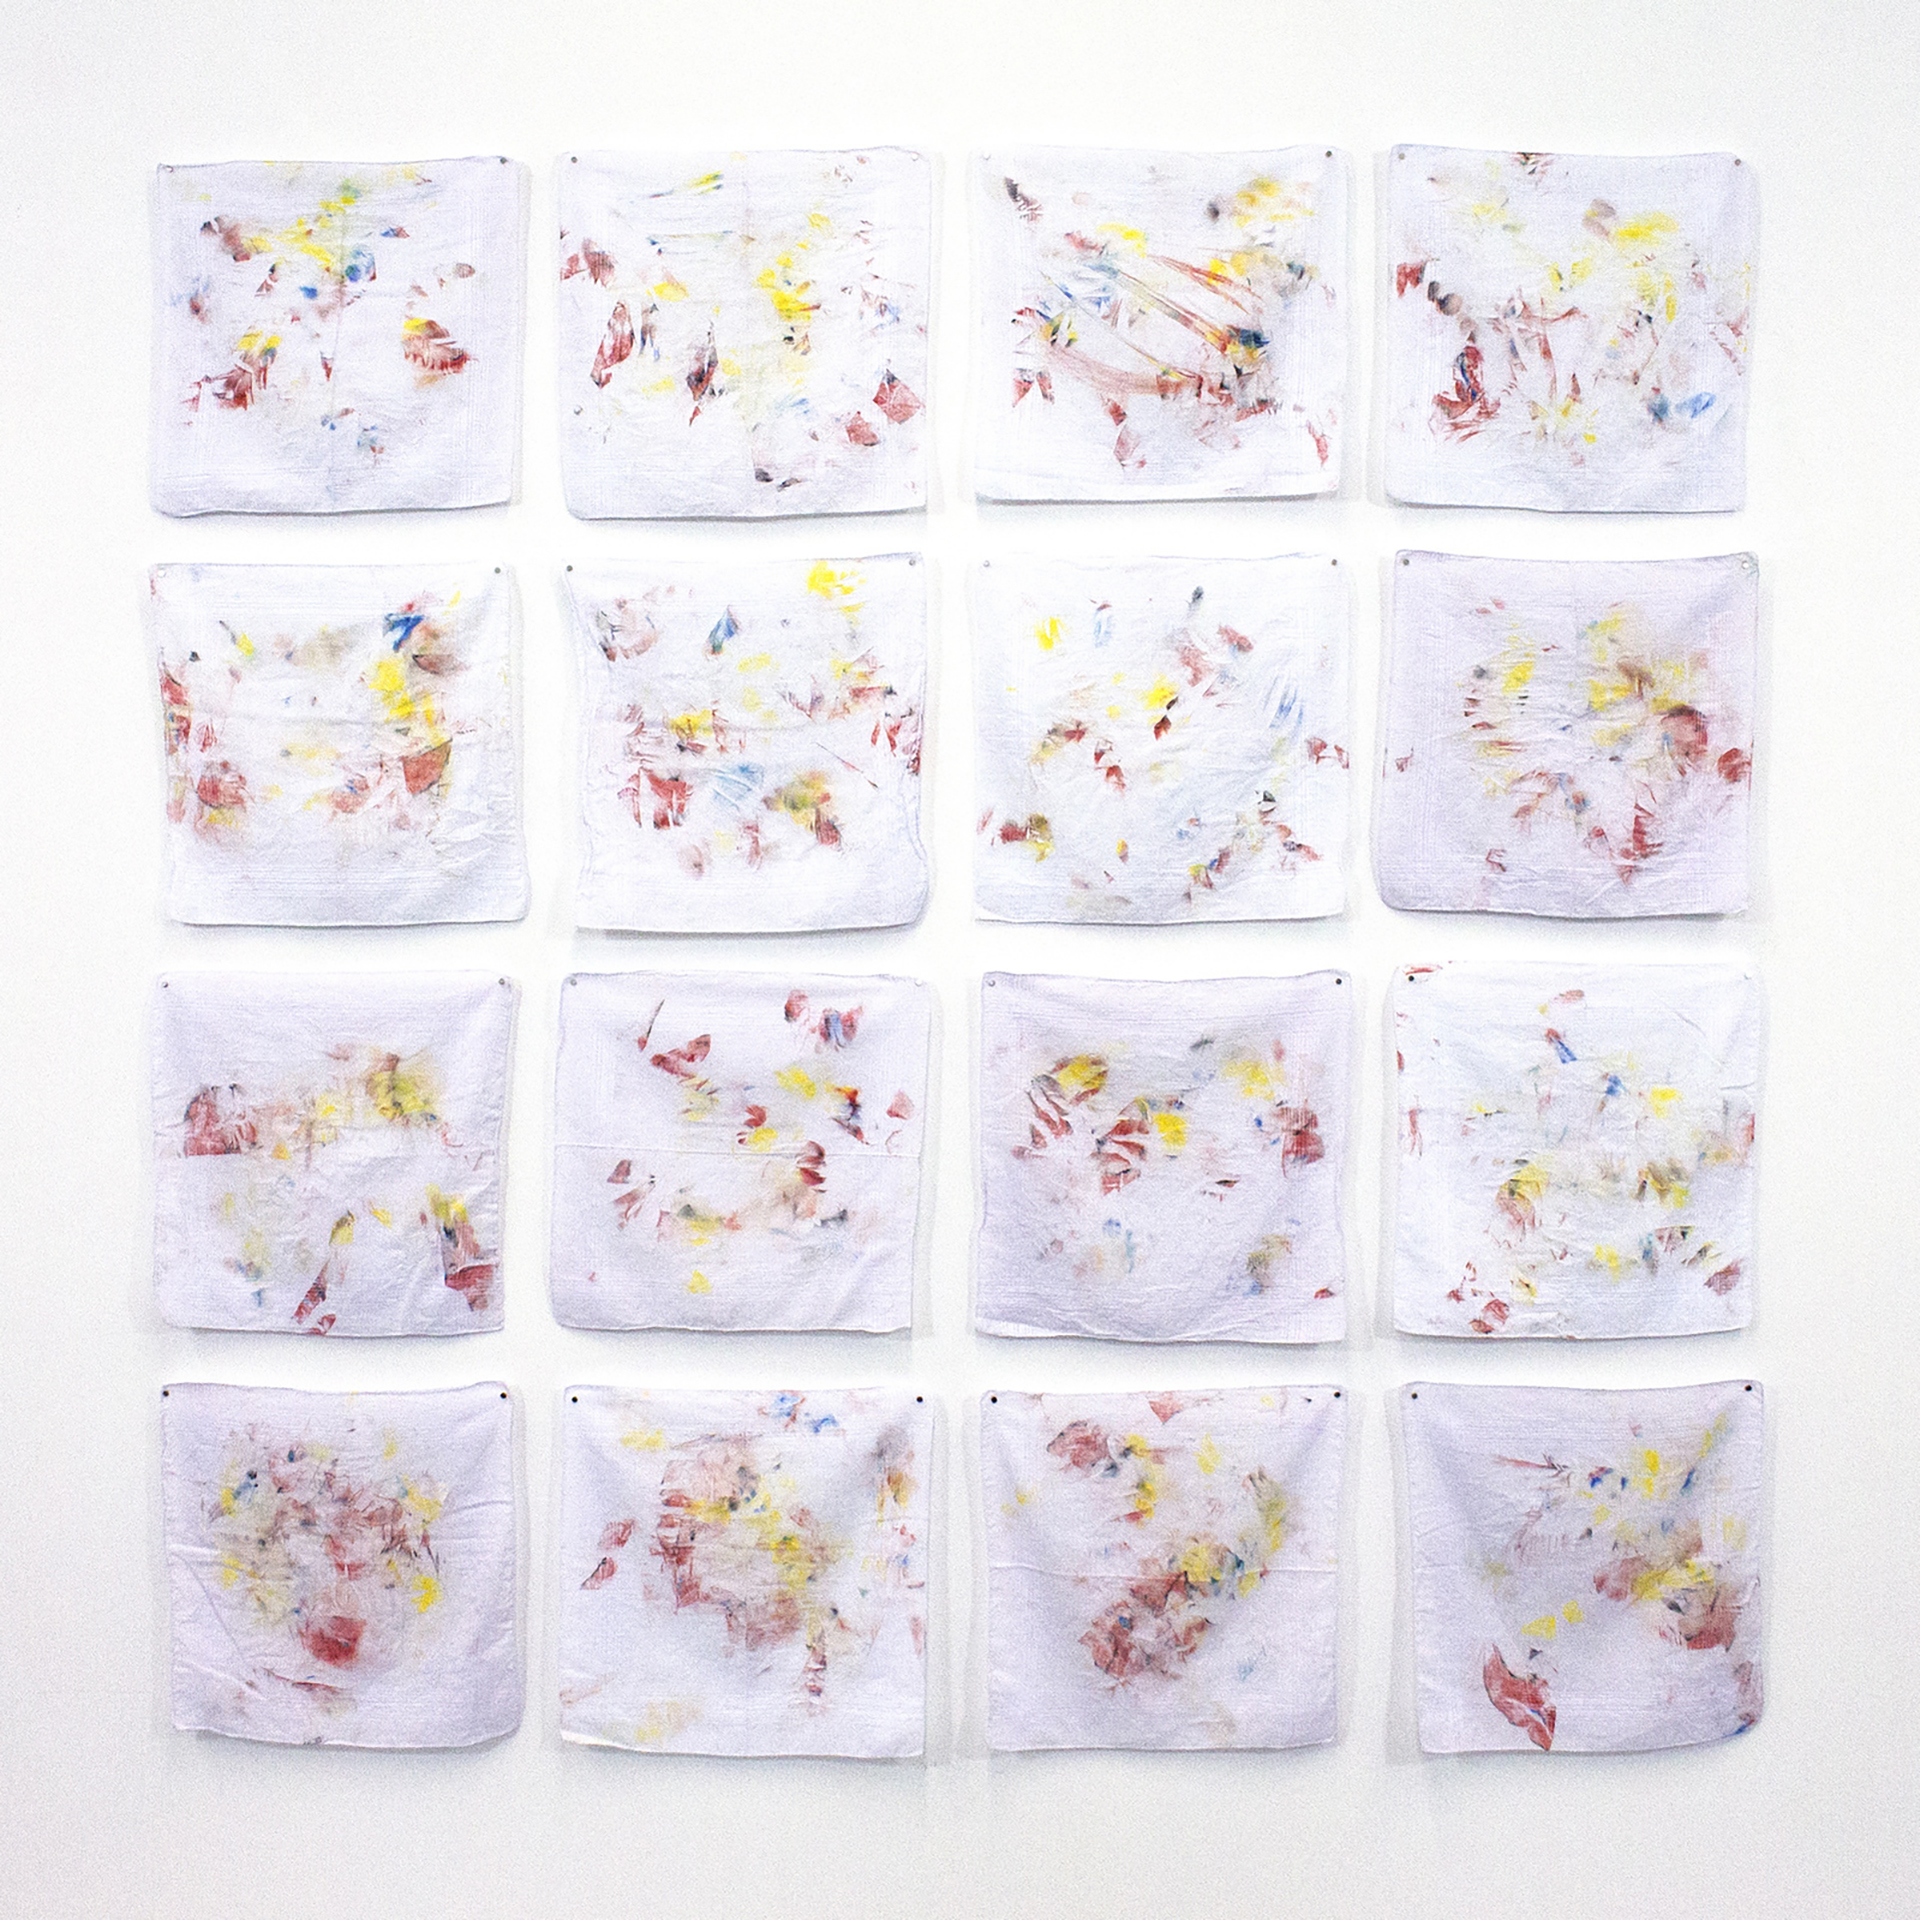 Makeup covered handkerchiefs arranged in a 4x4 grid as impressions from the process of removing the makeup